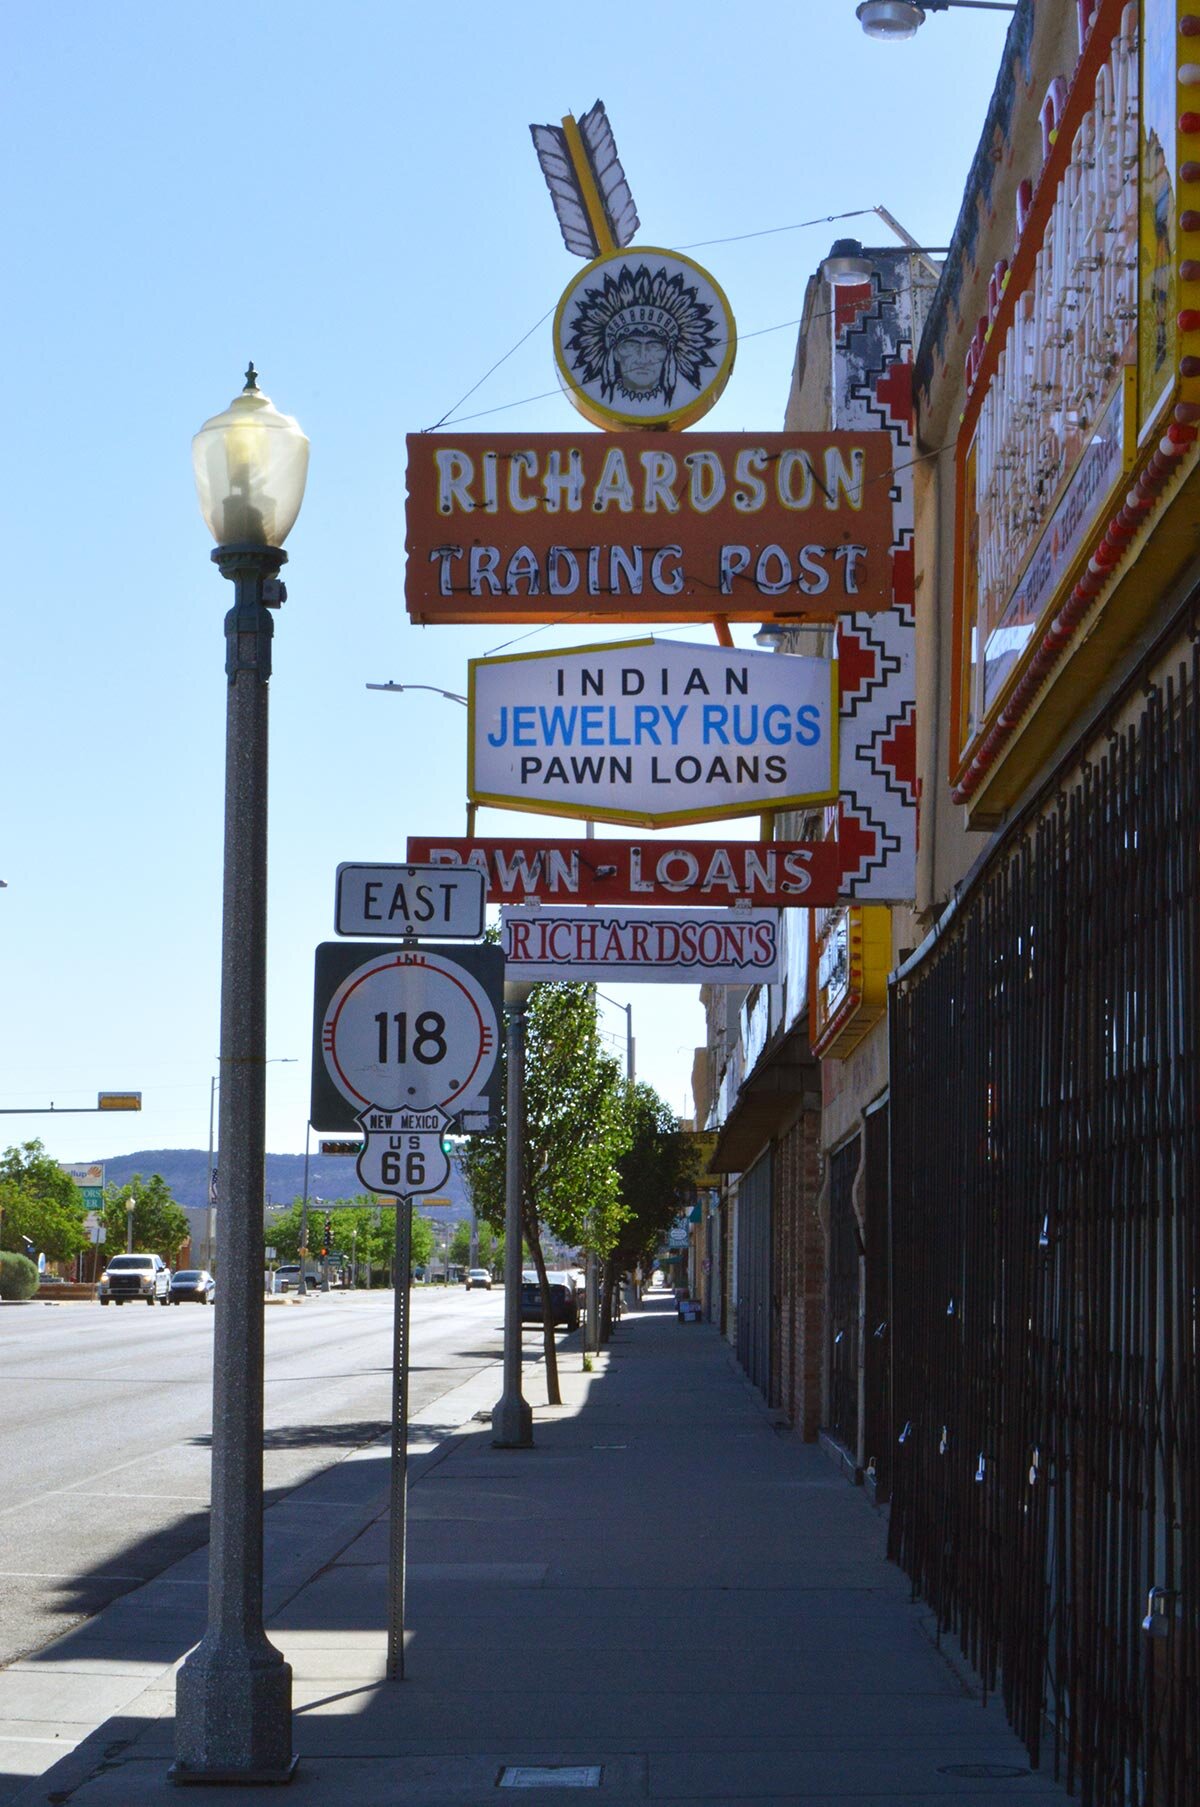 Gallup, New Mexico, 8am Pawn and Loan, June 